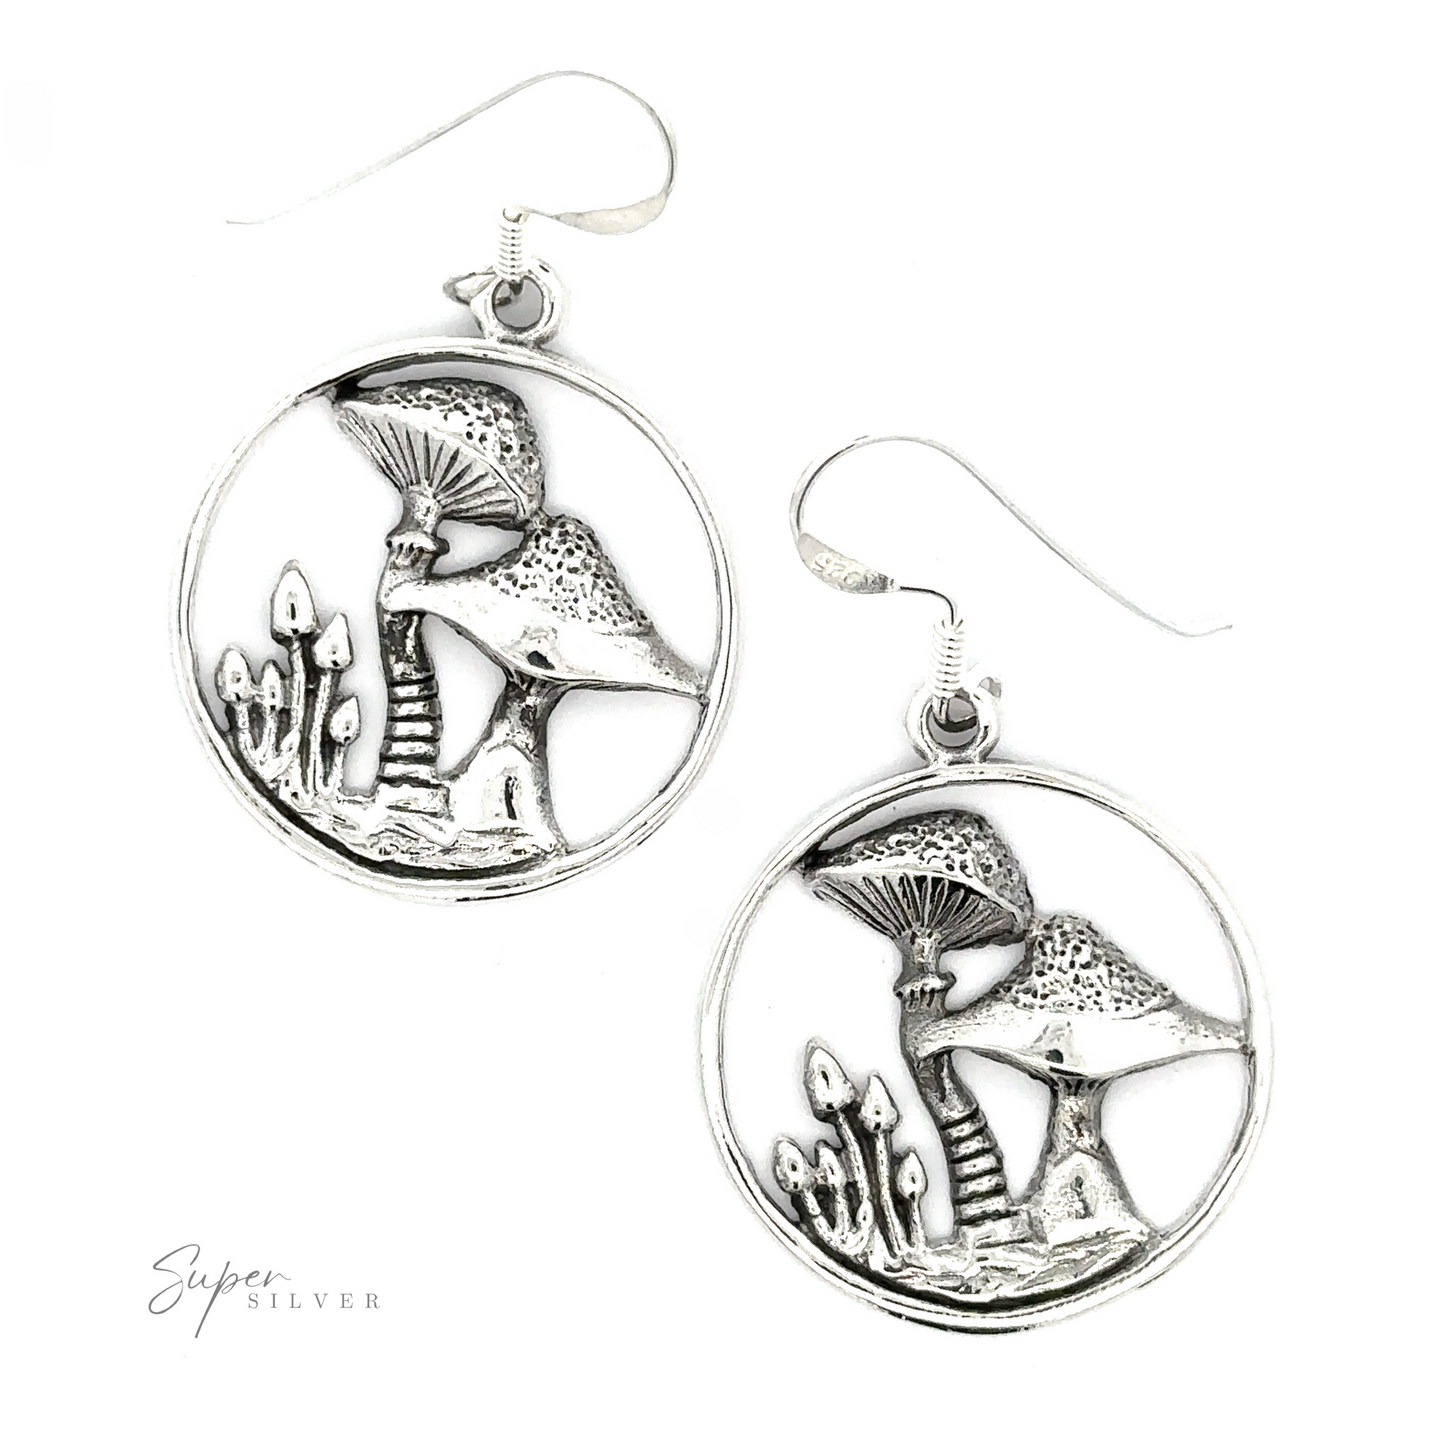 A pair of circular sterling silver earrings featuring intricate fungi and foliage designs, displayed against a white background with a signature "Trippy Encircled Mushroom Earrings" at the bottom.